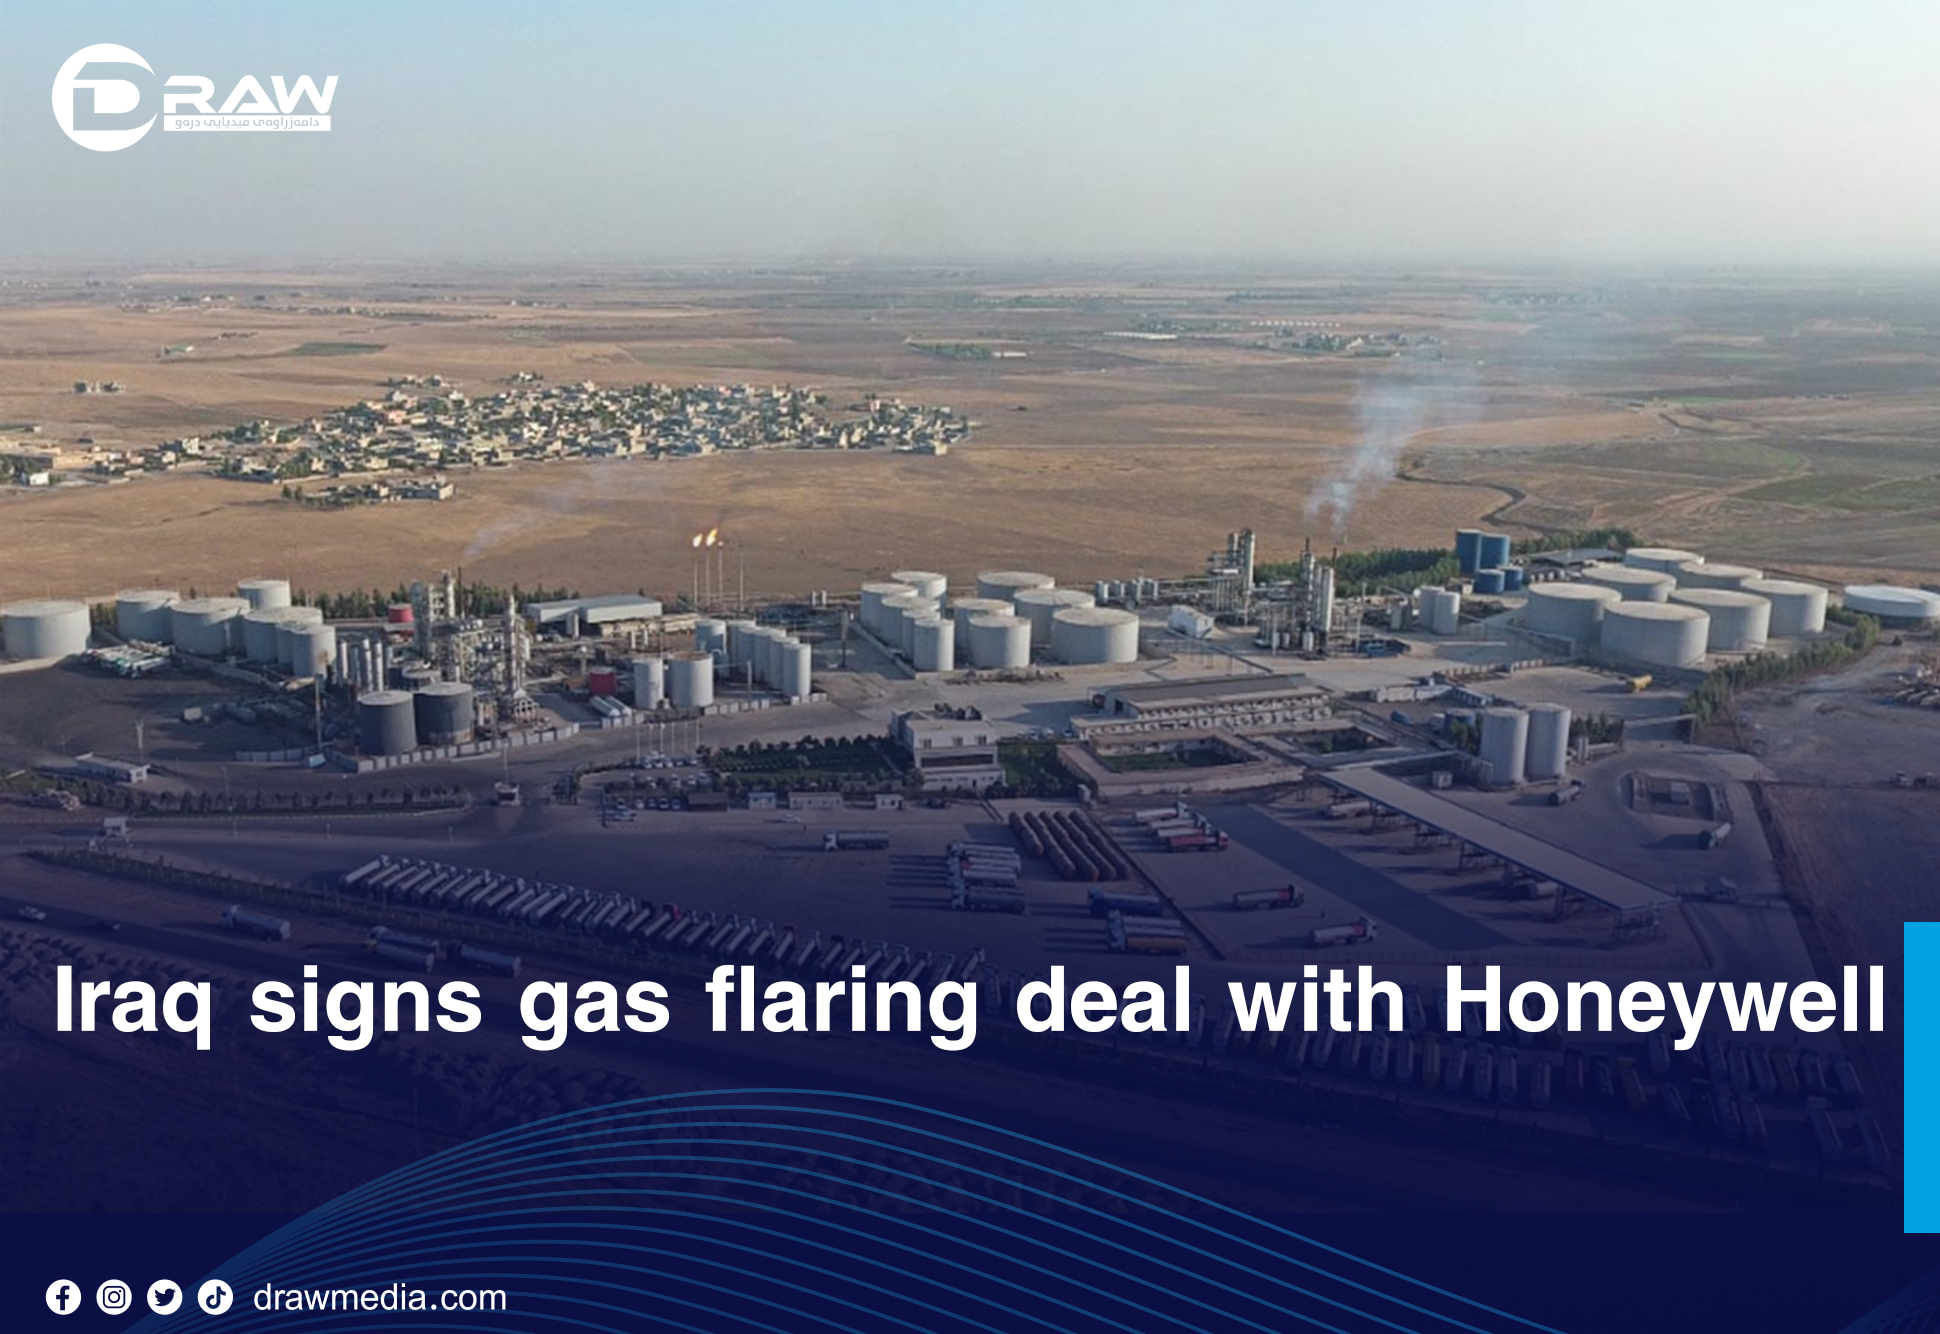 Draw Media- Iraq signs gas flaring deal with Honeywell